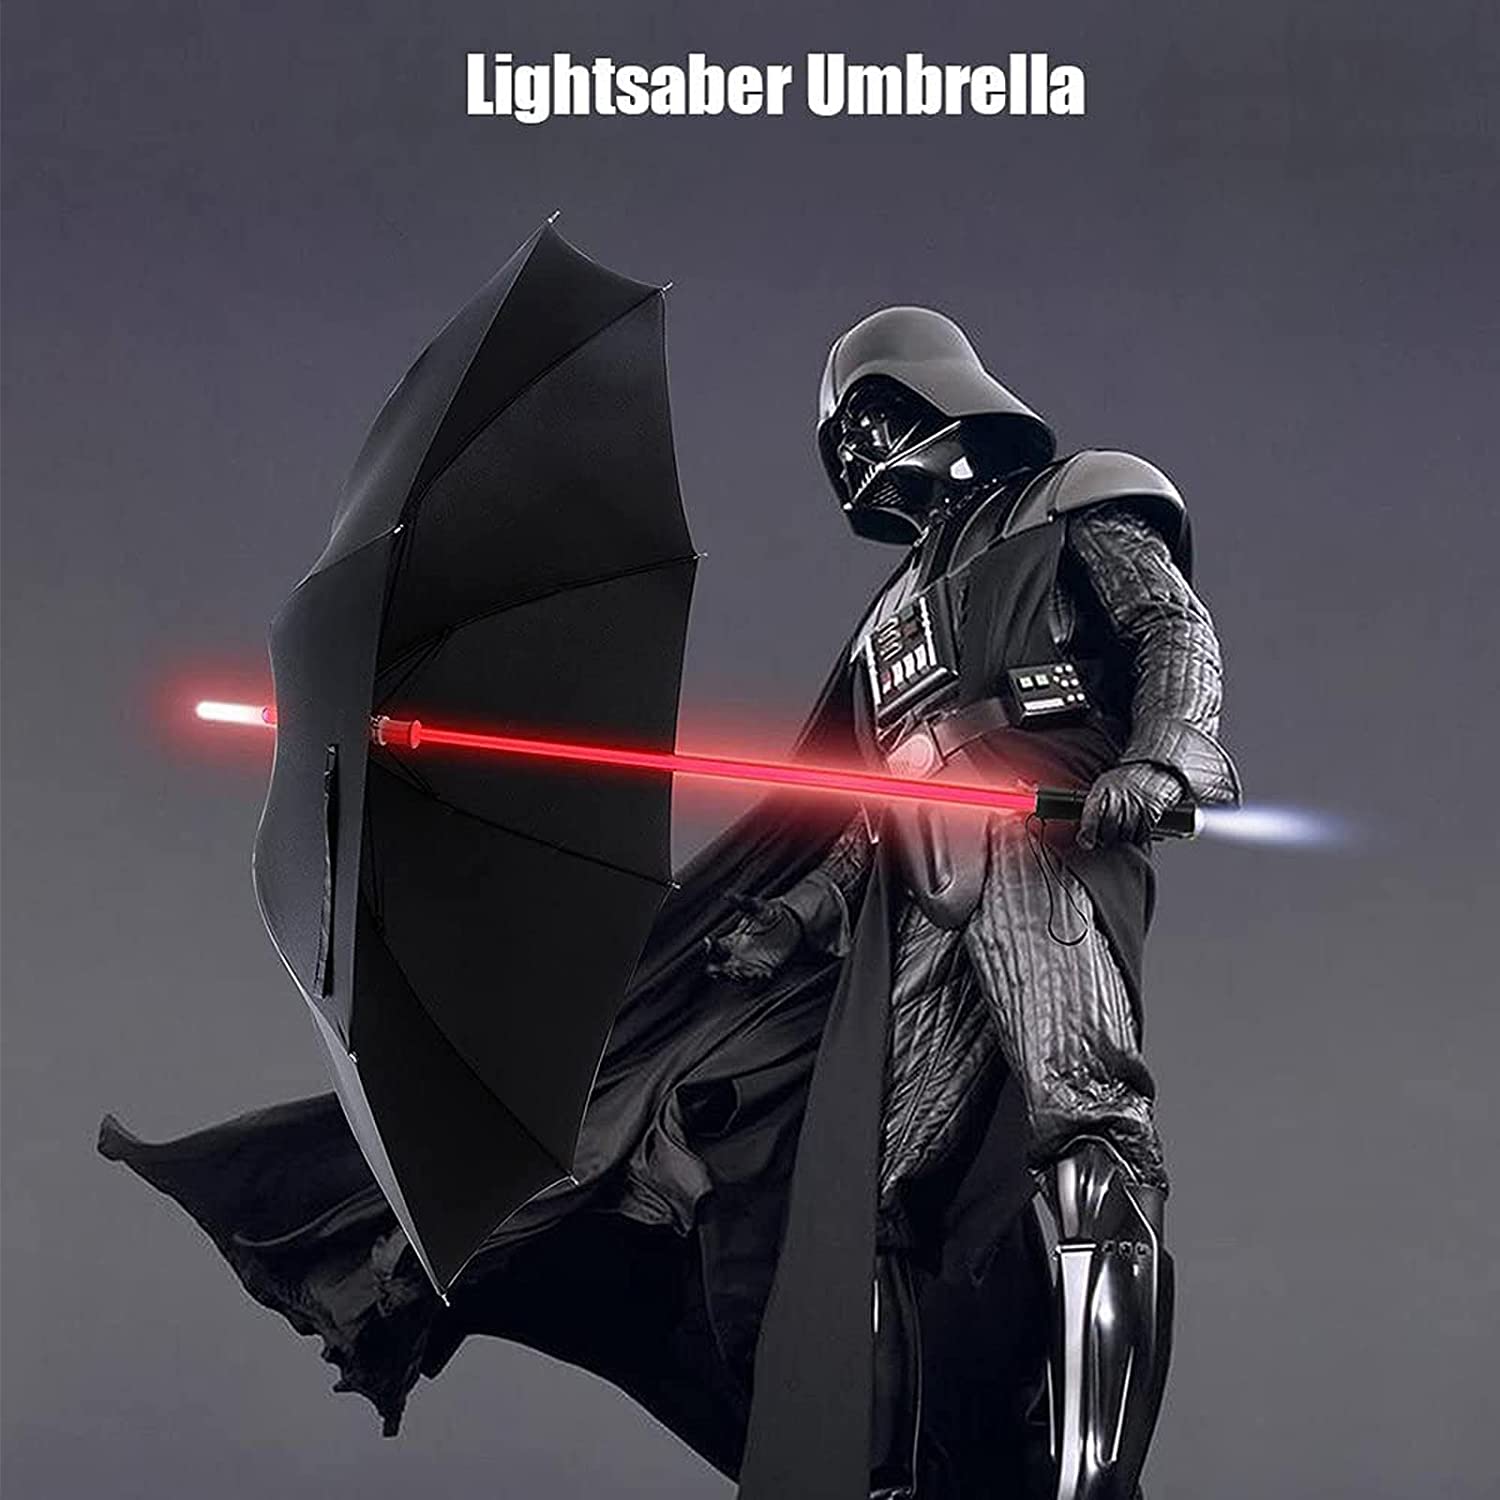 Darth Vader is holding a black umbrella which has a handle shaped like a red lightsaber